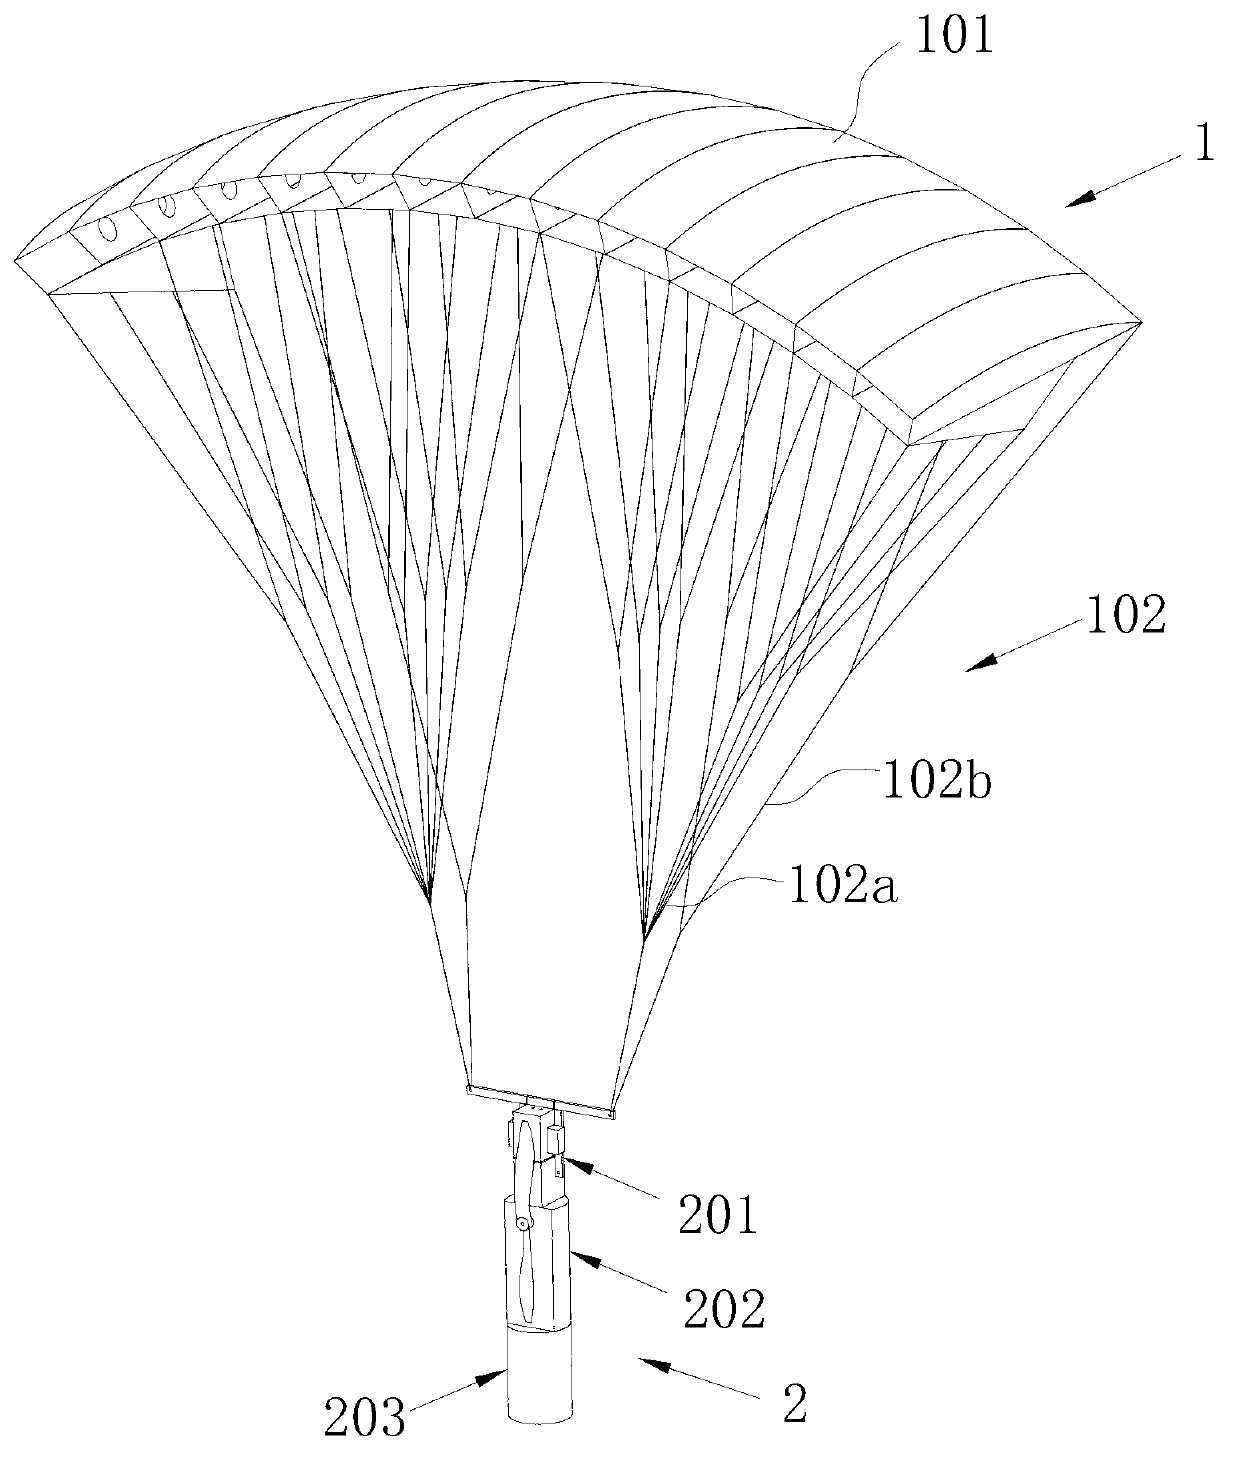 Parafoil aircraft applicable to cylindrical space loading